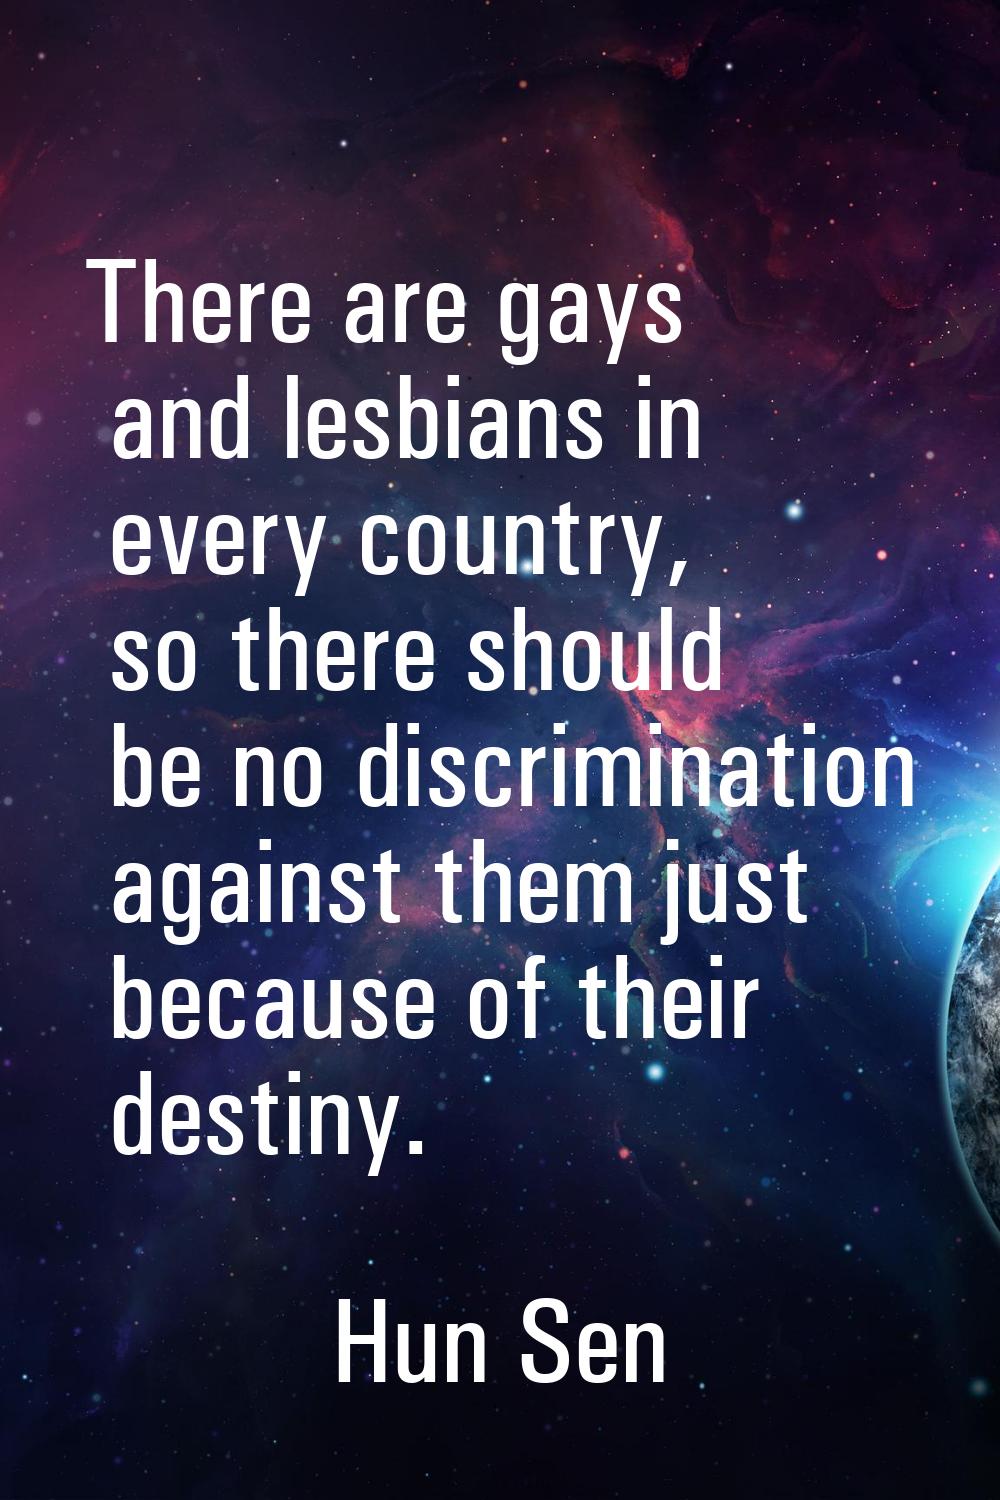 There are gays and lesbians in every country, so there should be no discrimination against them jus